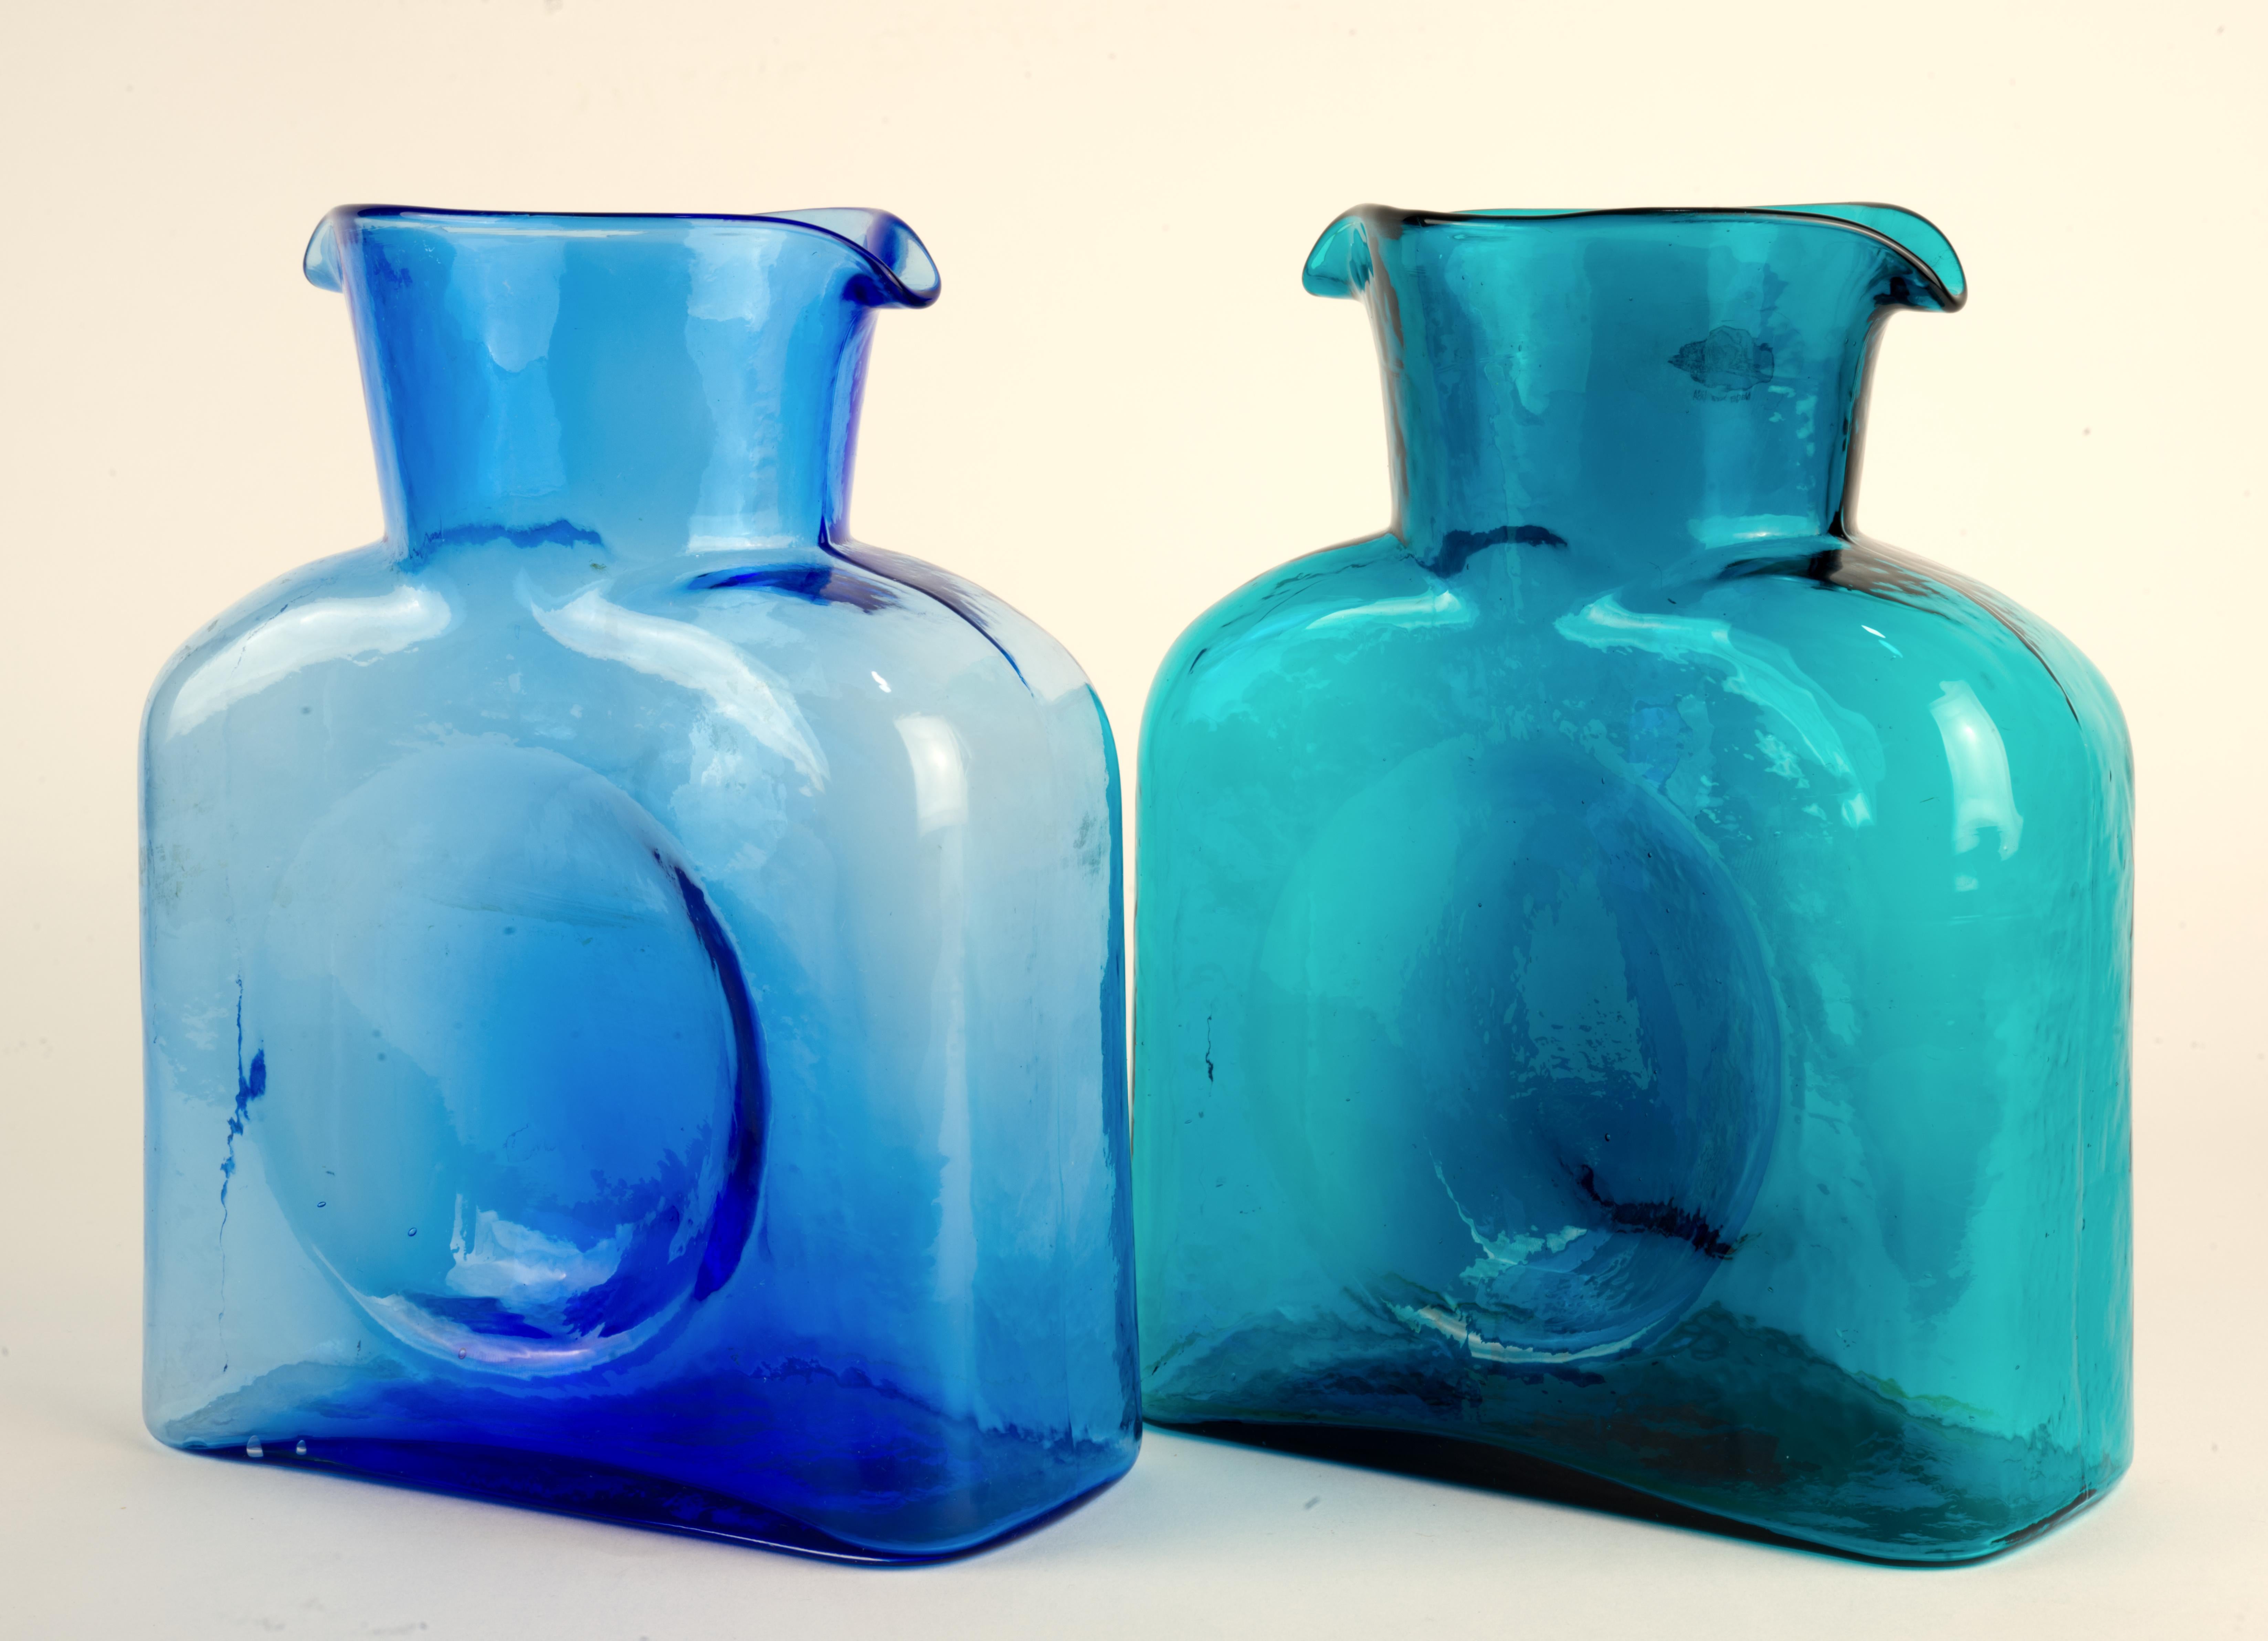  Pair of 384 double spouts water bottles was hand made by Blenko in currently discontinued colors of Azure and Seabreeze. 

Azure was first introduced from 1985 to 2005, and it was returned to the catalogue until 2020. It is a Cased color, with a